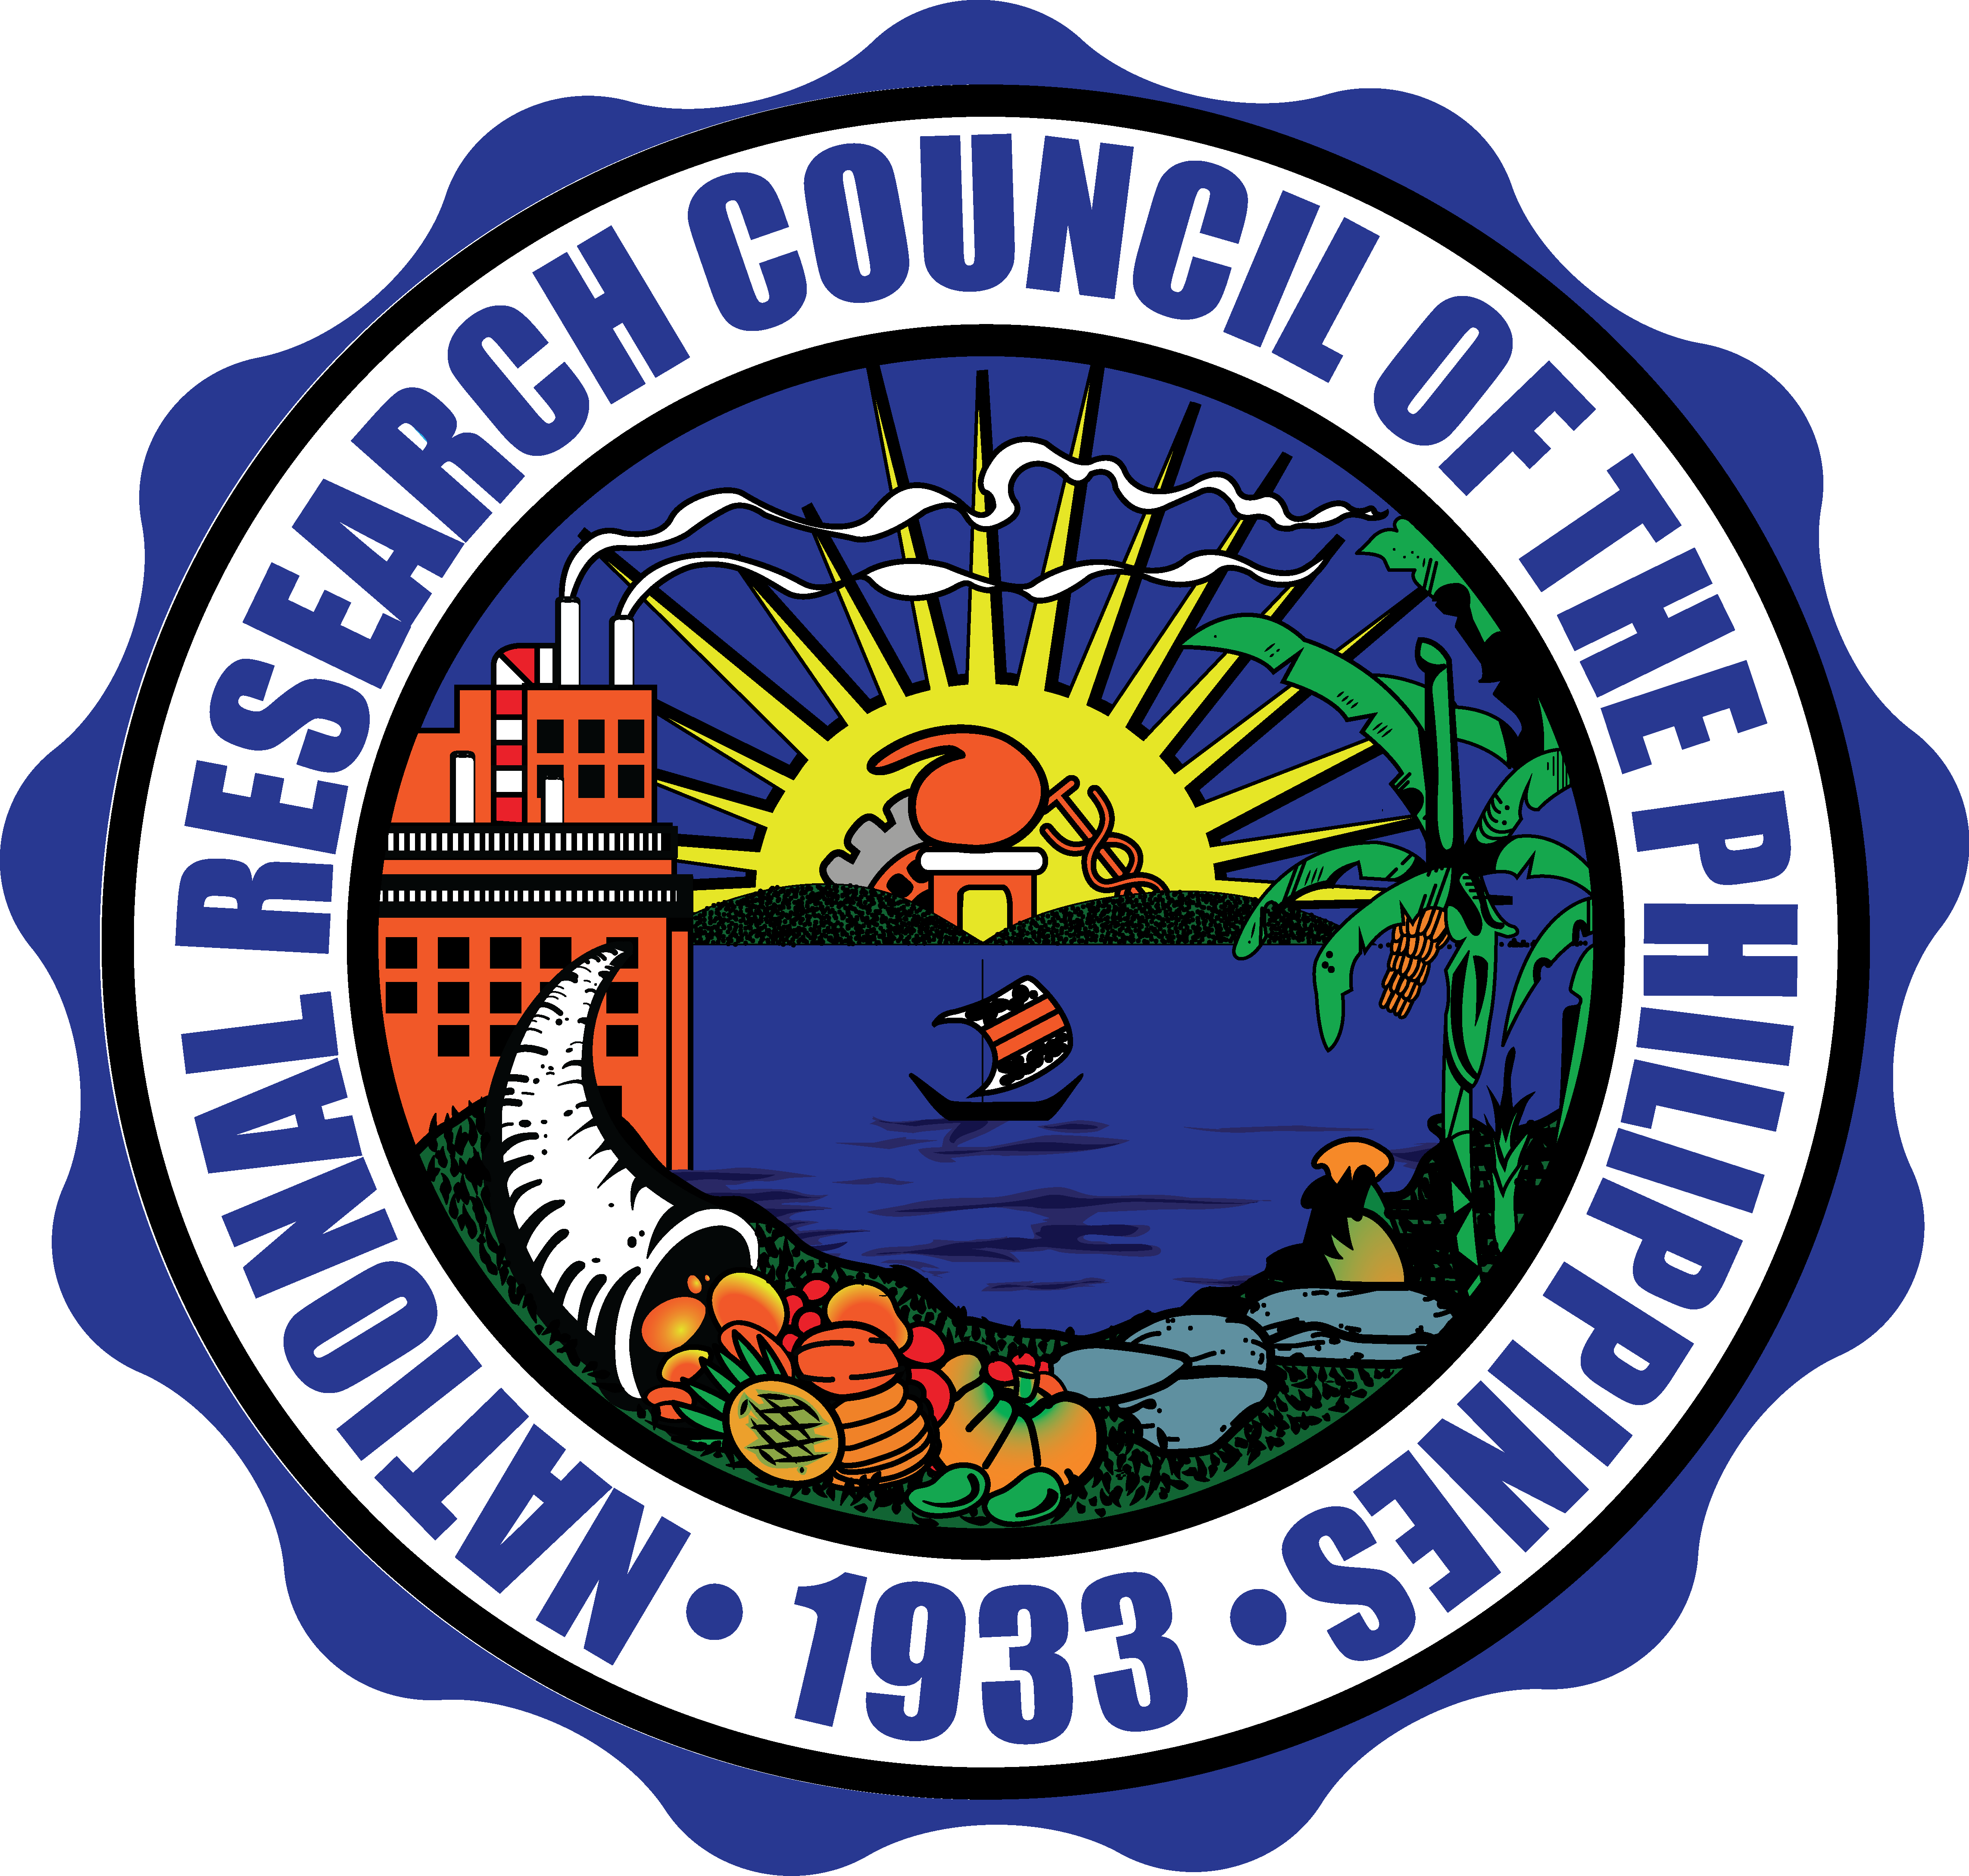 National Research Council of the Philippines (NRCP)